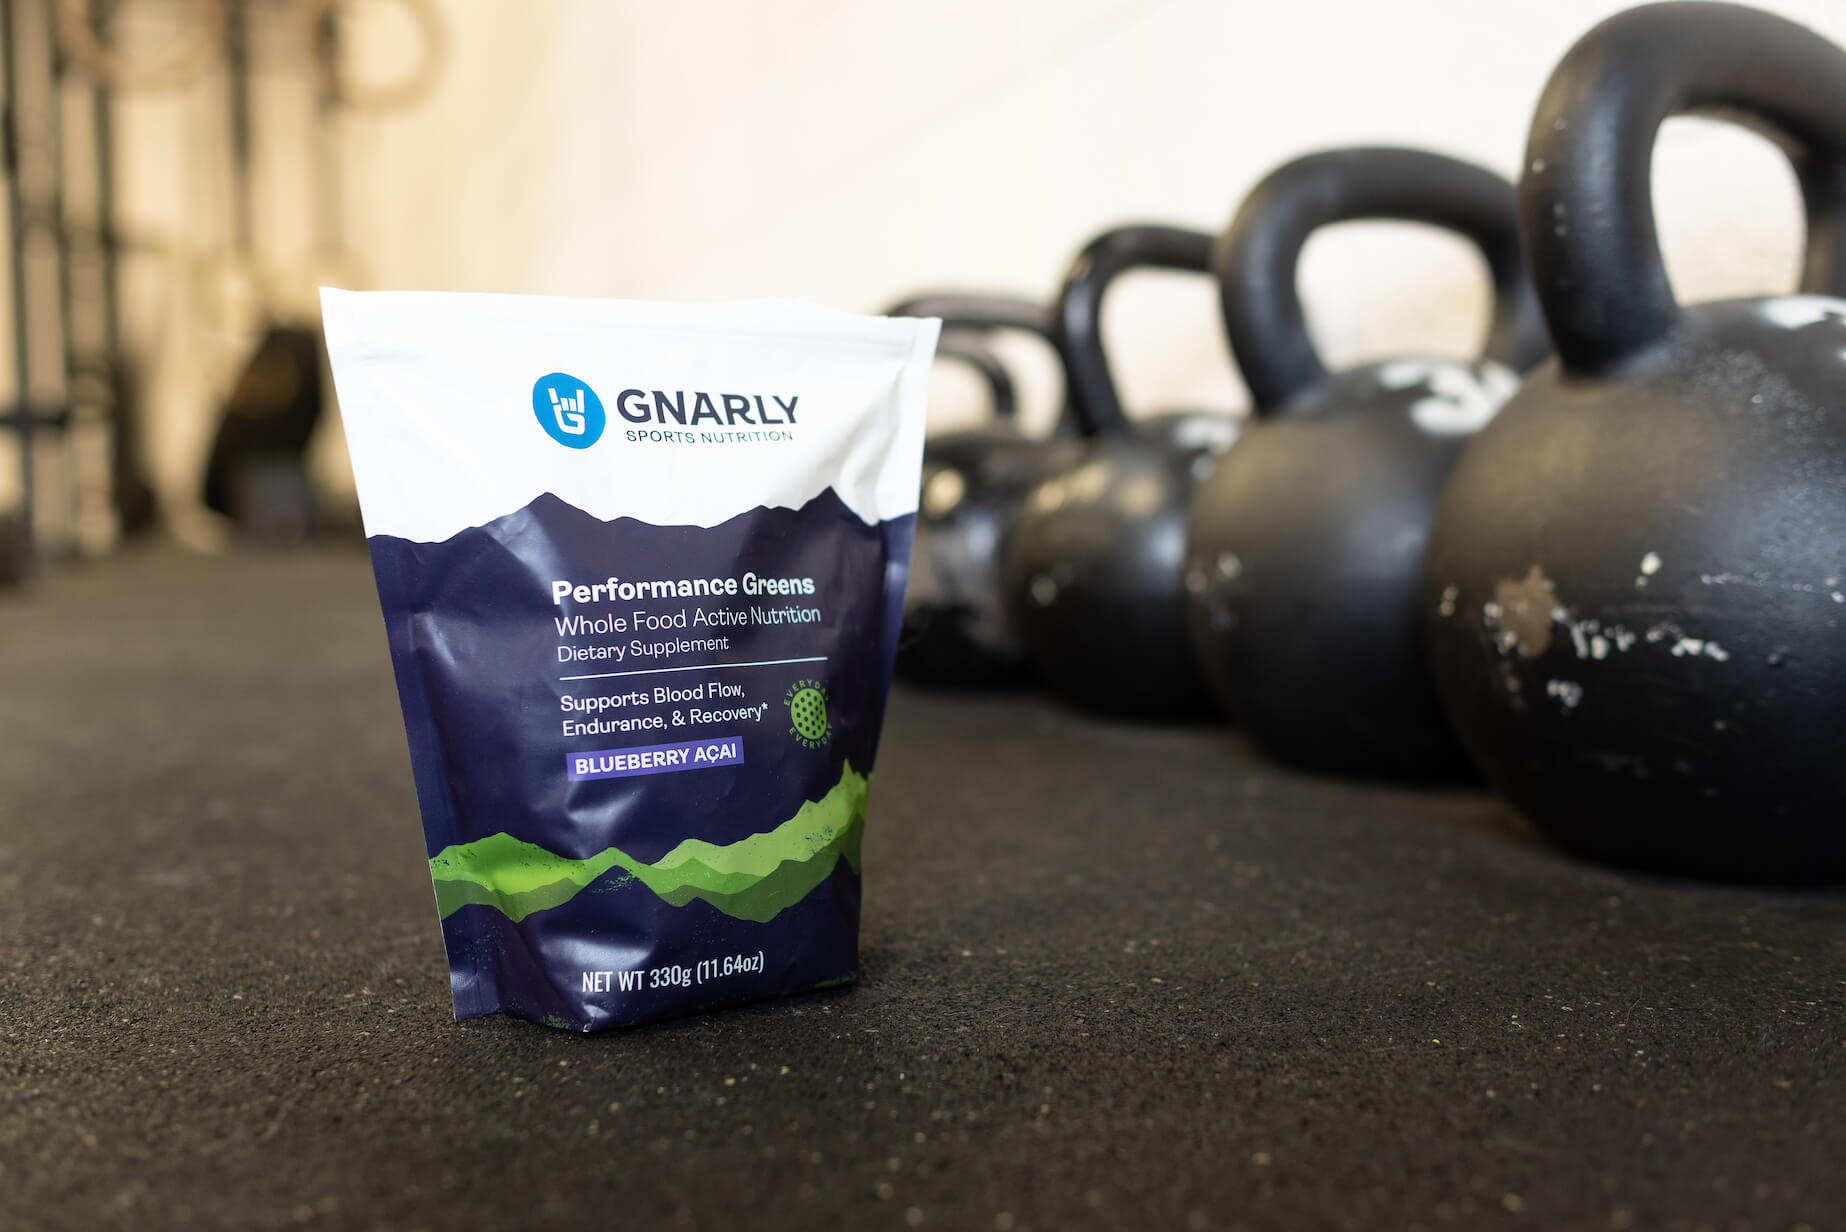 Gnarly Nutrition packet sitting next to kettle bells in a gym